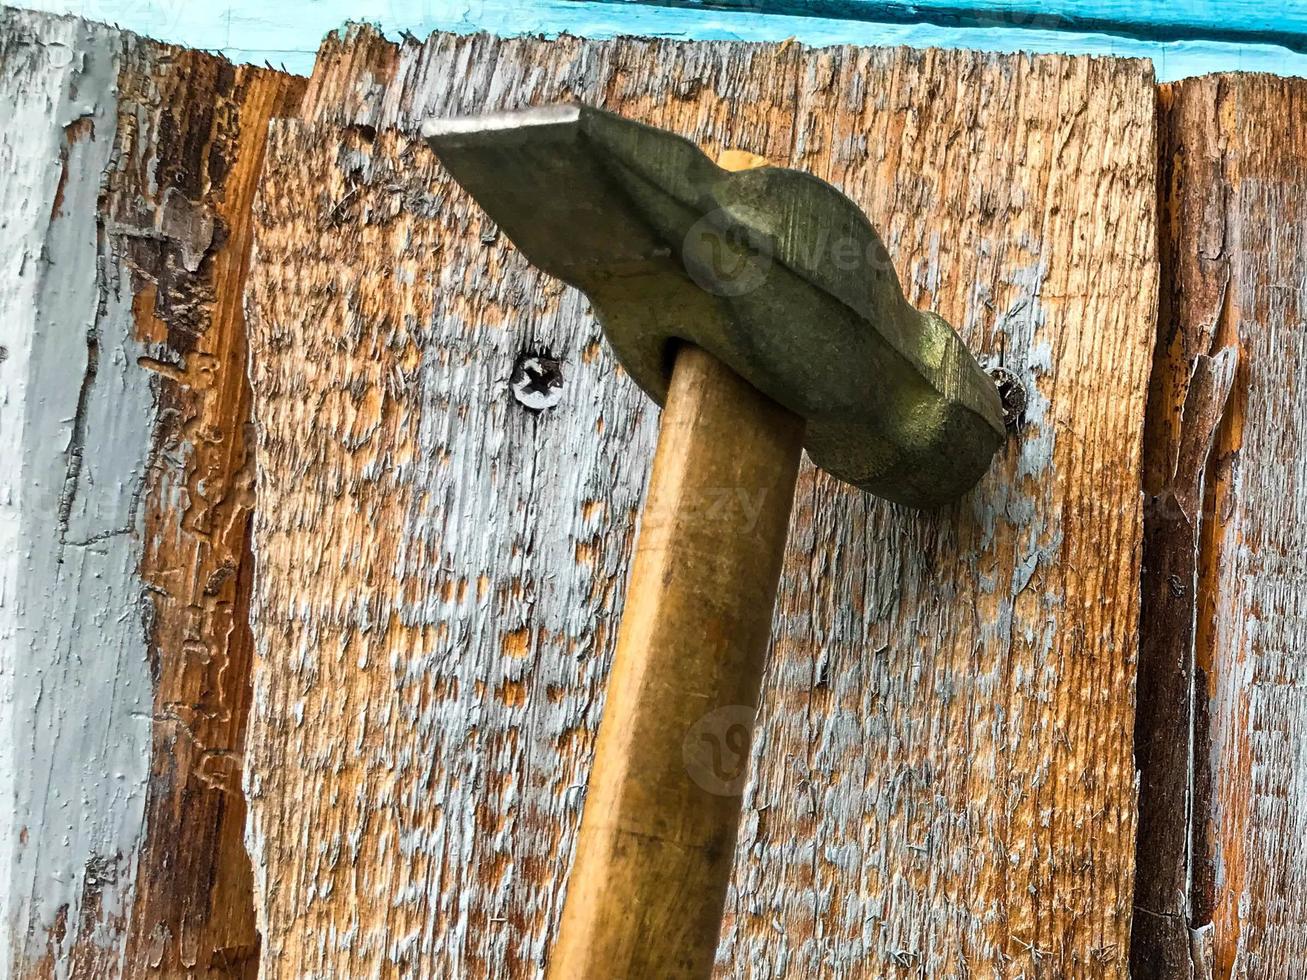 hammer on a wooden handle with a metal end. hammer nails on a wooden surface. metal nails are driven into a blue-painted board. building a house with a hammer and nails photo